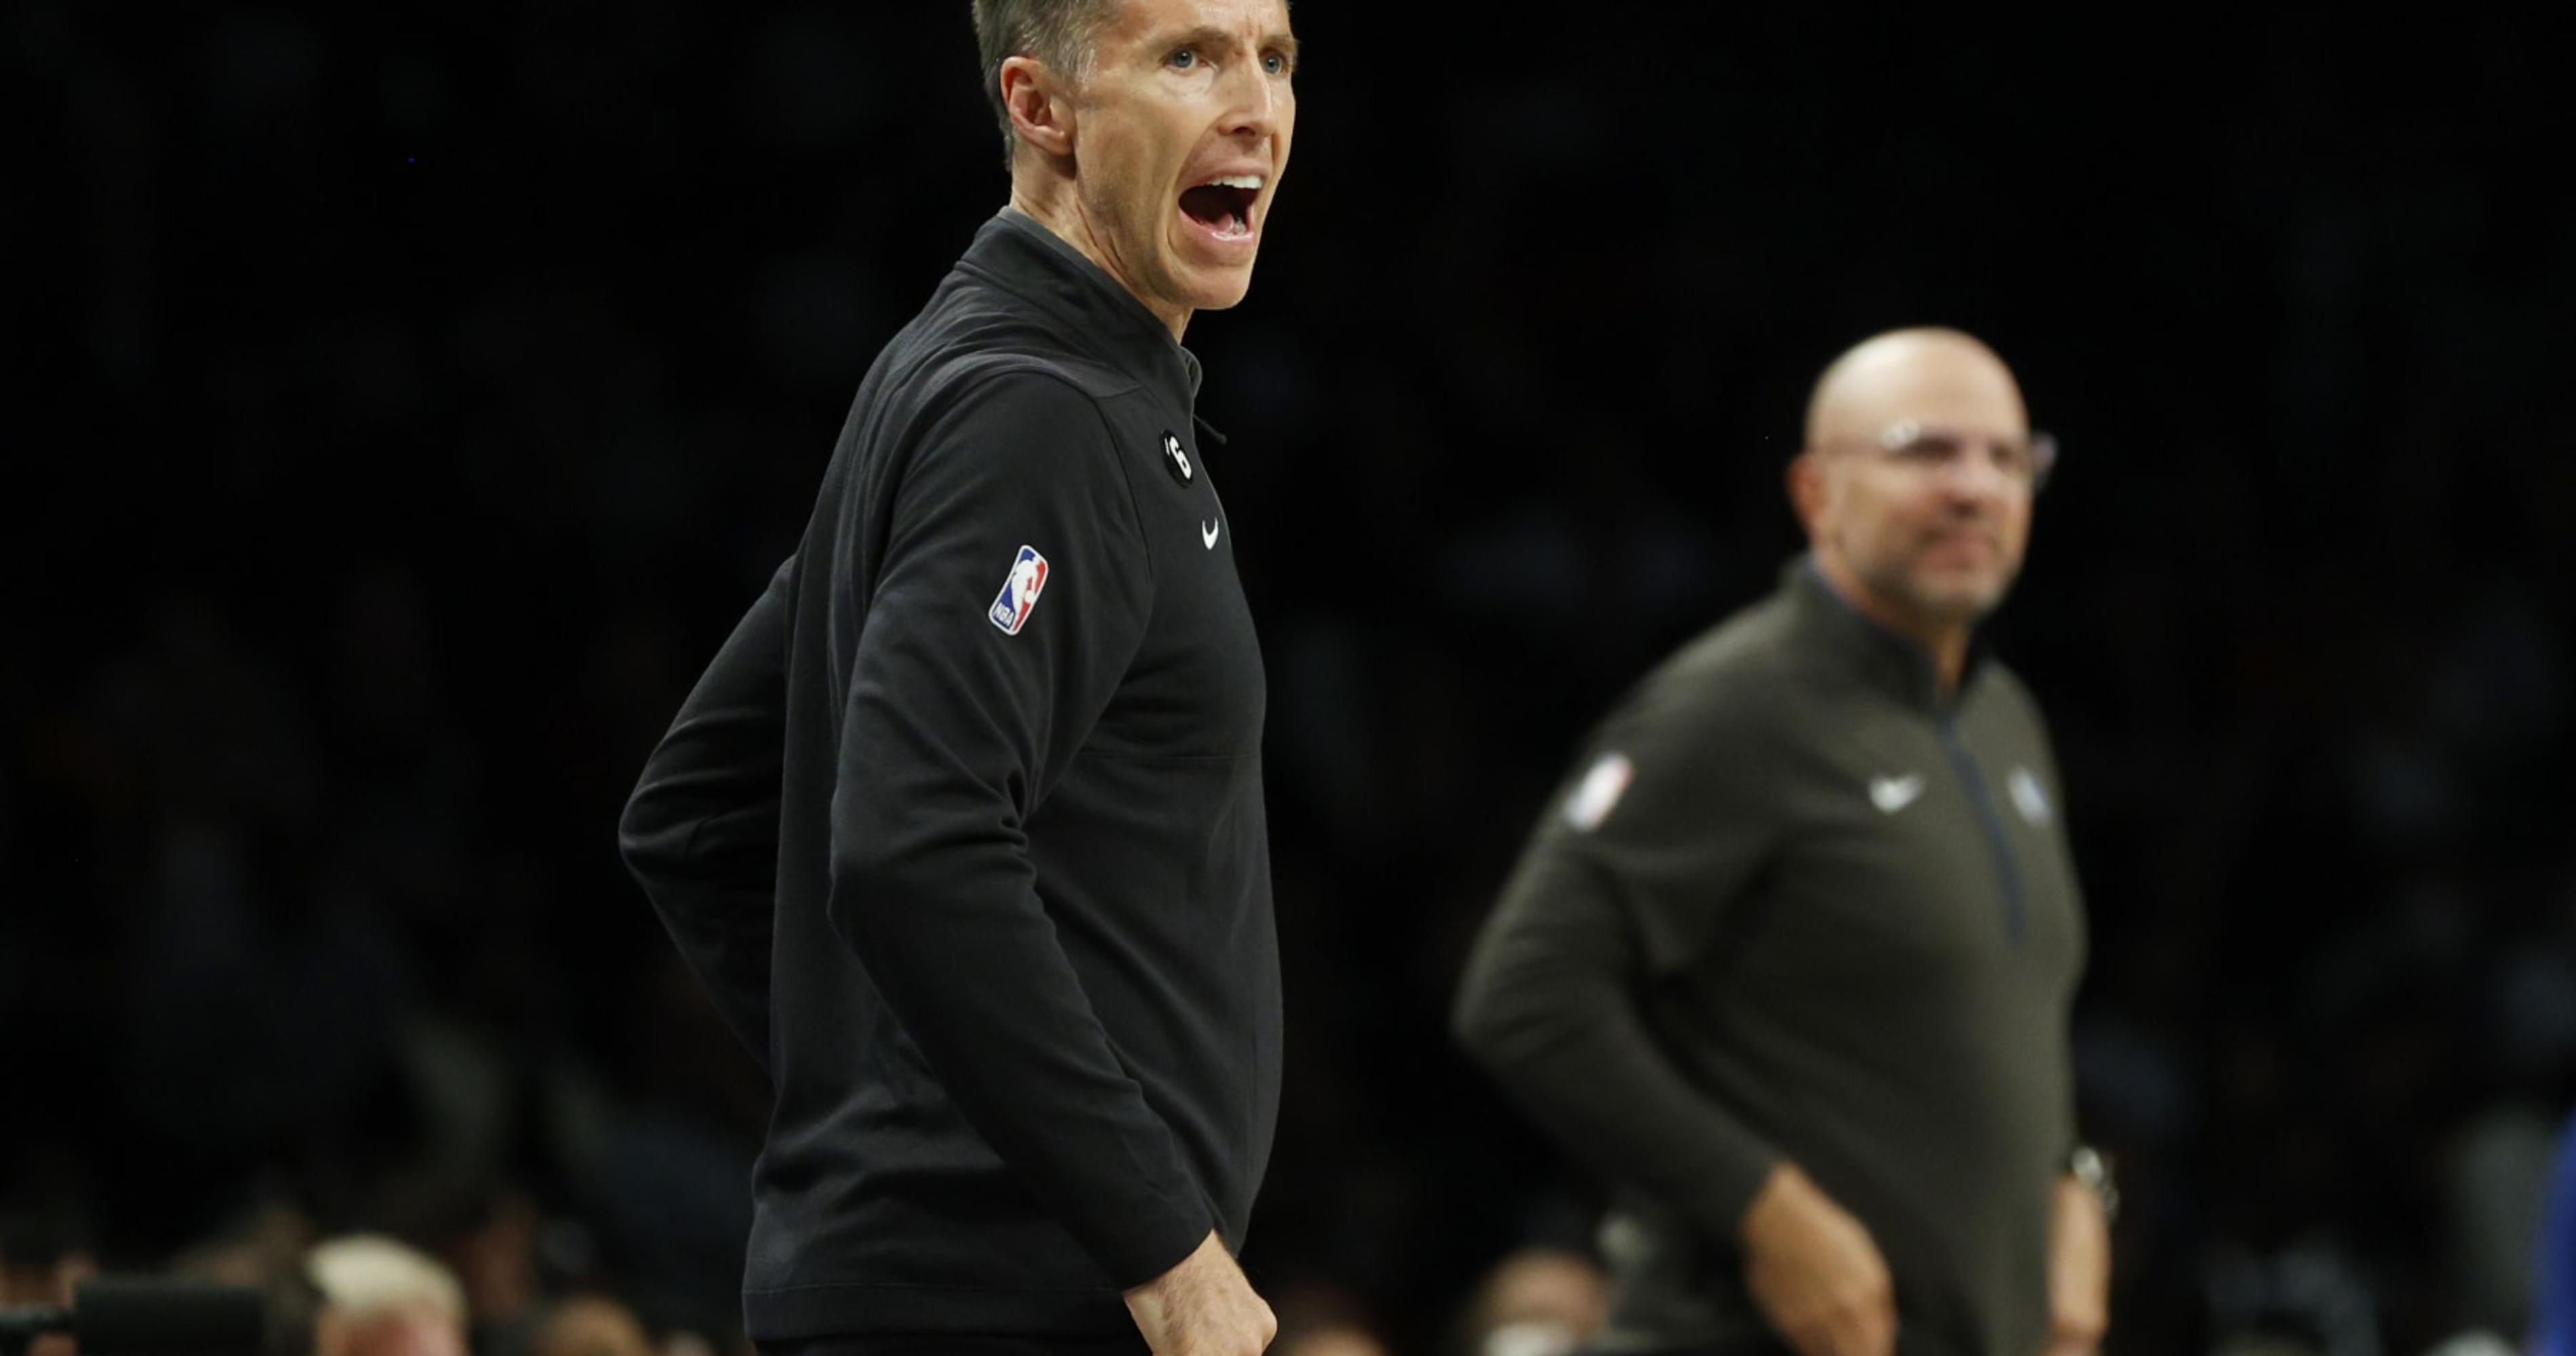 Steve Nash Says Nets' Loss to Pacers Was 'Disaster': 'Didn't See the Desire'